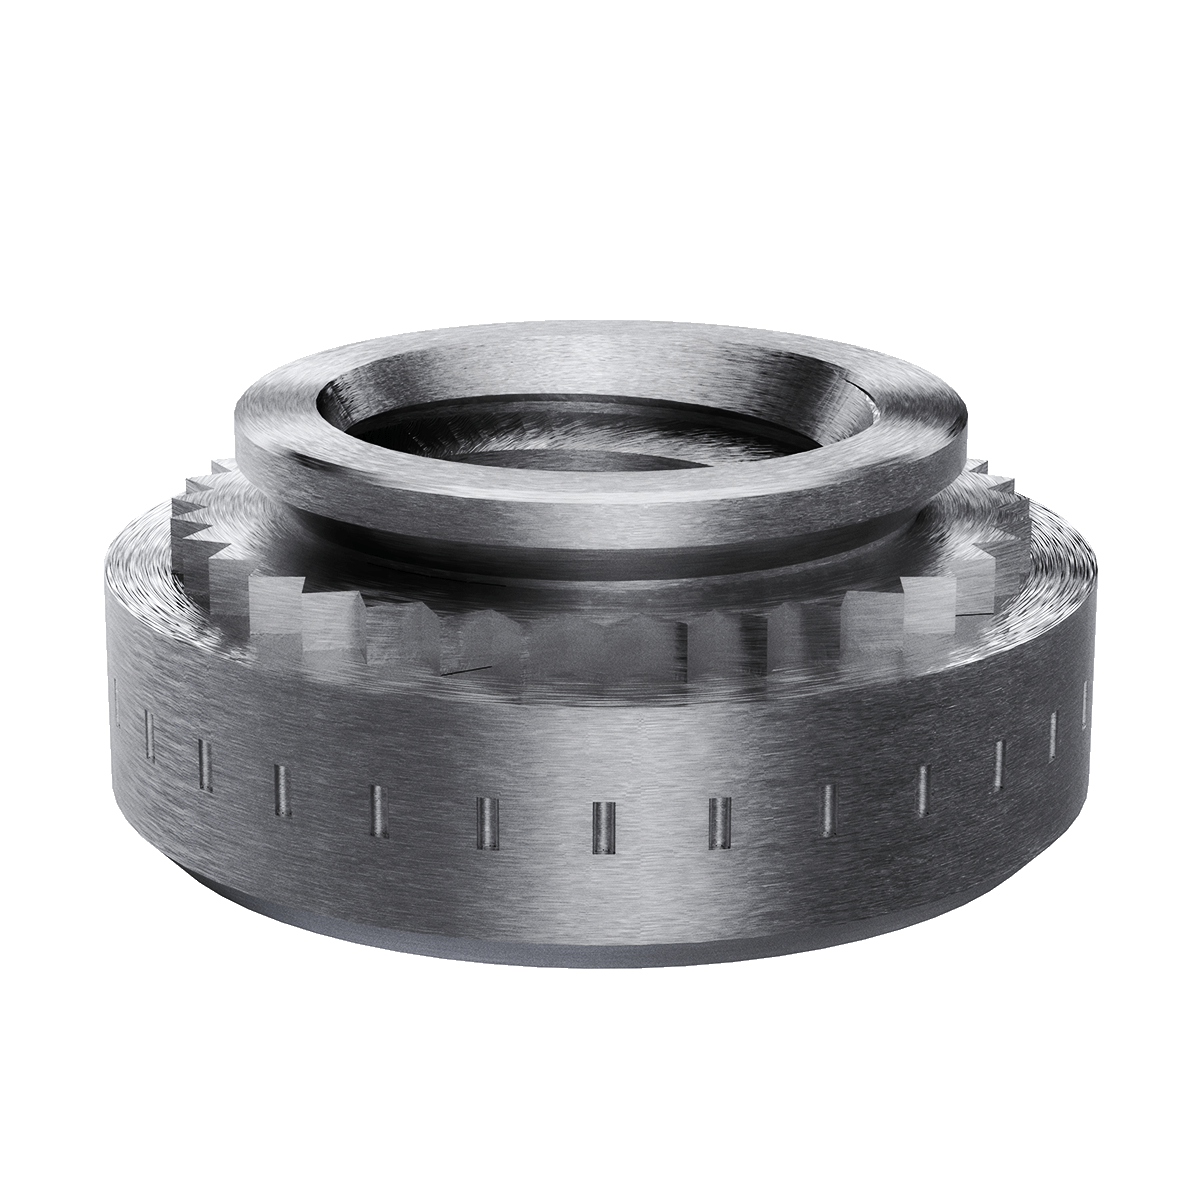 Self-Clinching Nut, For SS, 17-4 Stainless Steel, Passivated, Metric, M3x0.5 x 1, 100 Pack